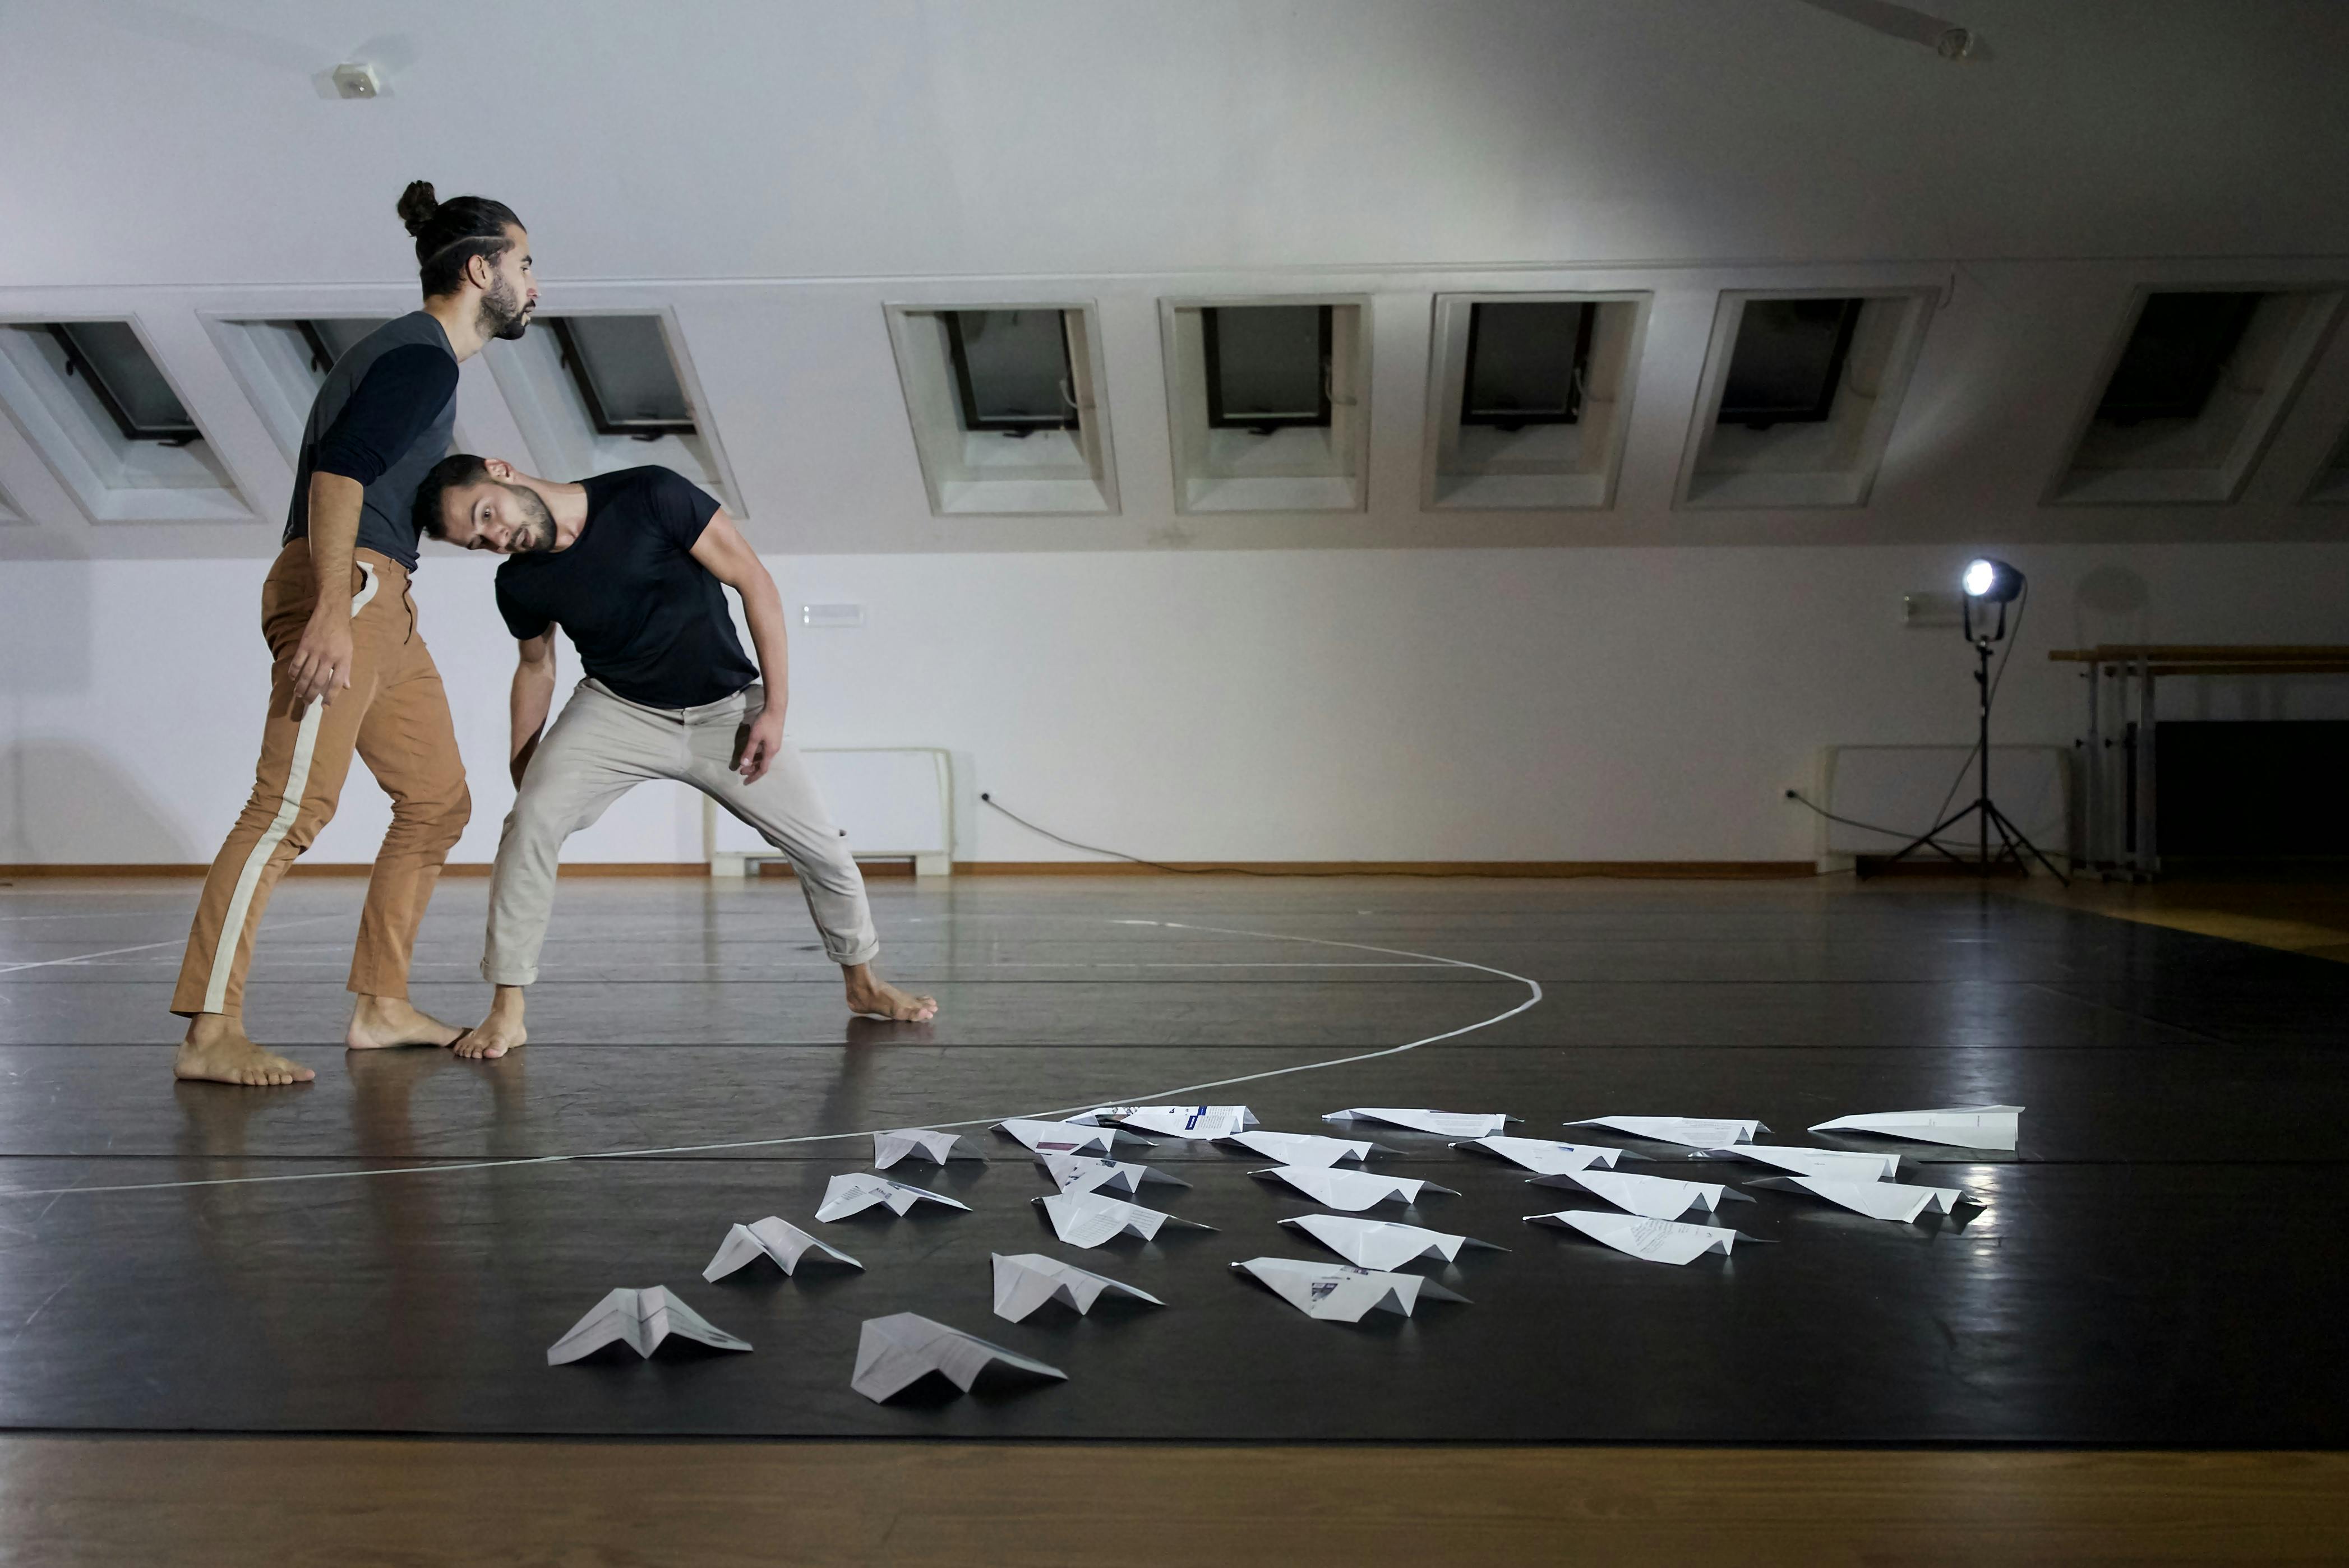 The two choreographers and dancers rehearse in the room: one of them puts his weight on the head of the other, leaning to support him. On the floor there are several paper airplanes arranged in a triangle. 